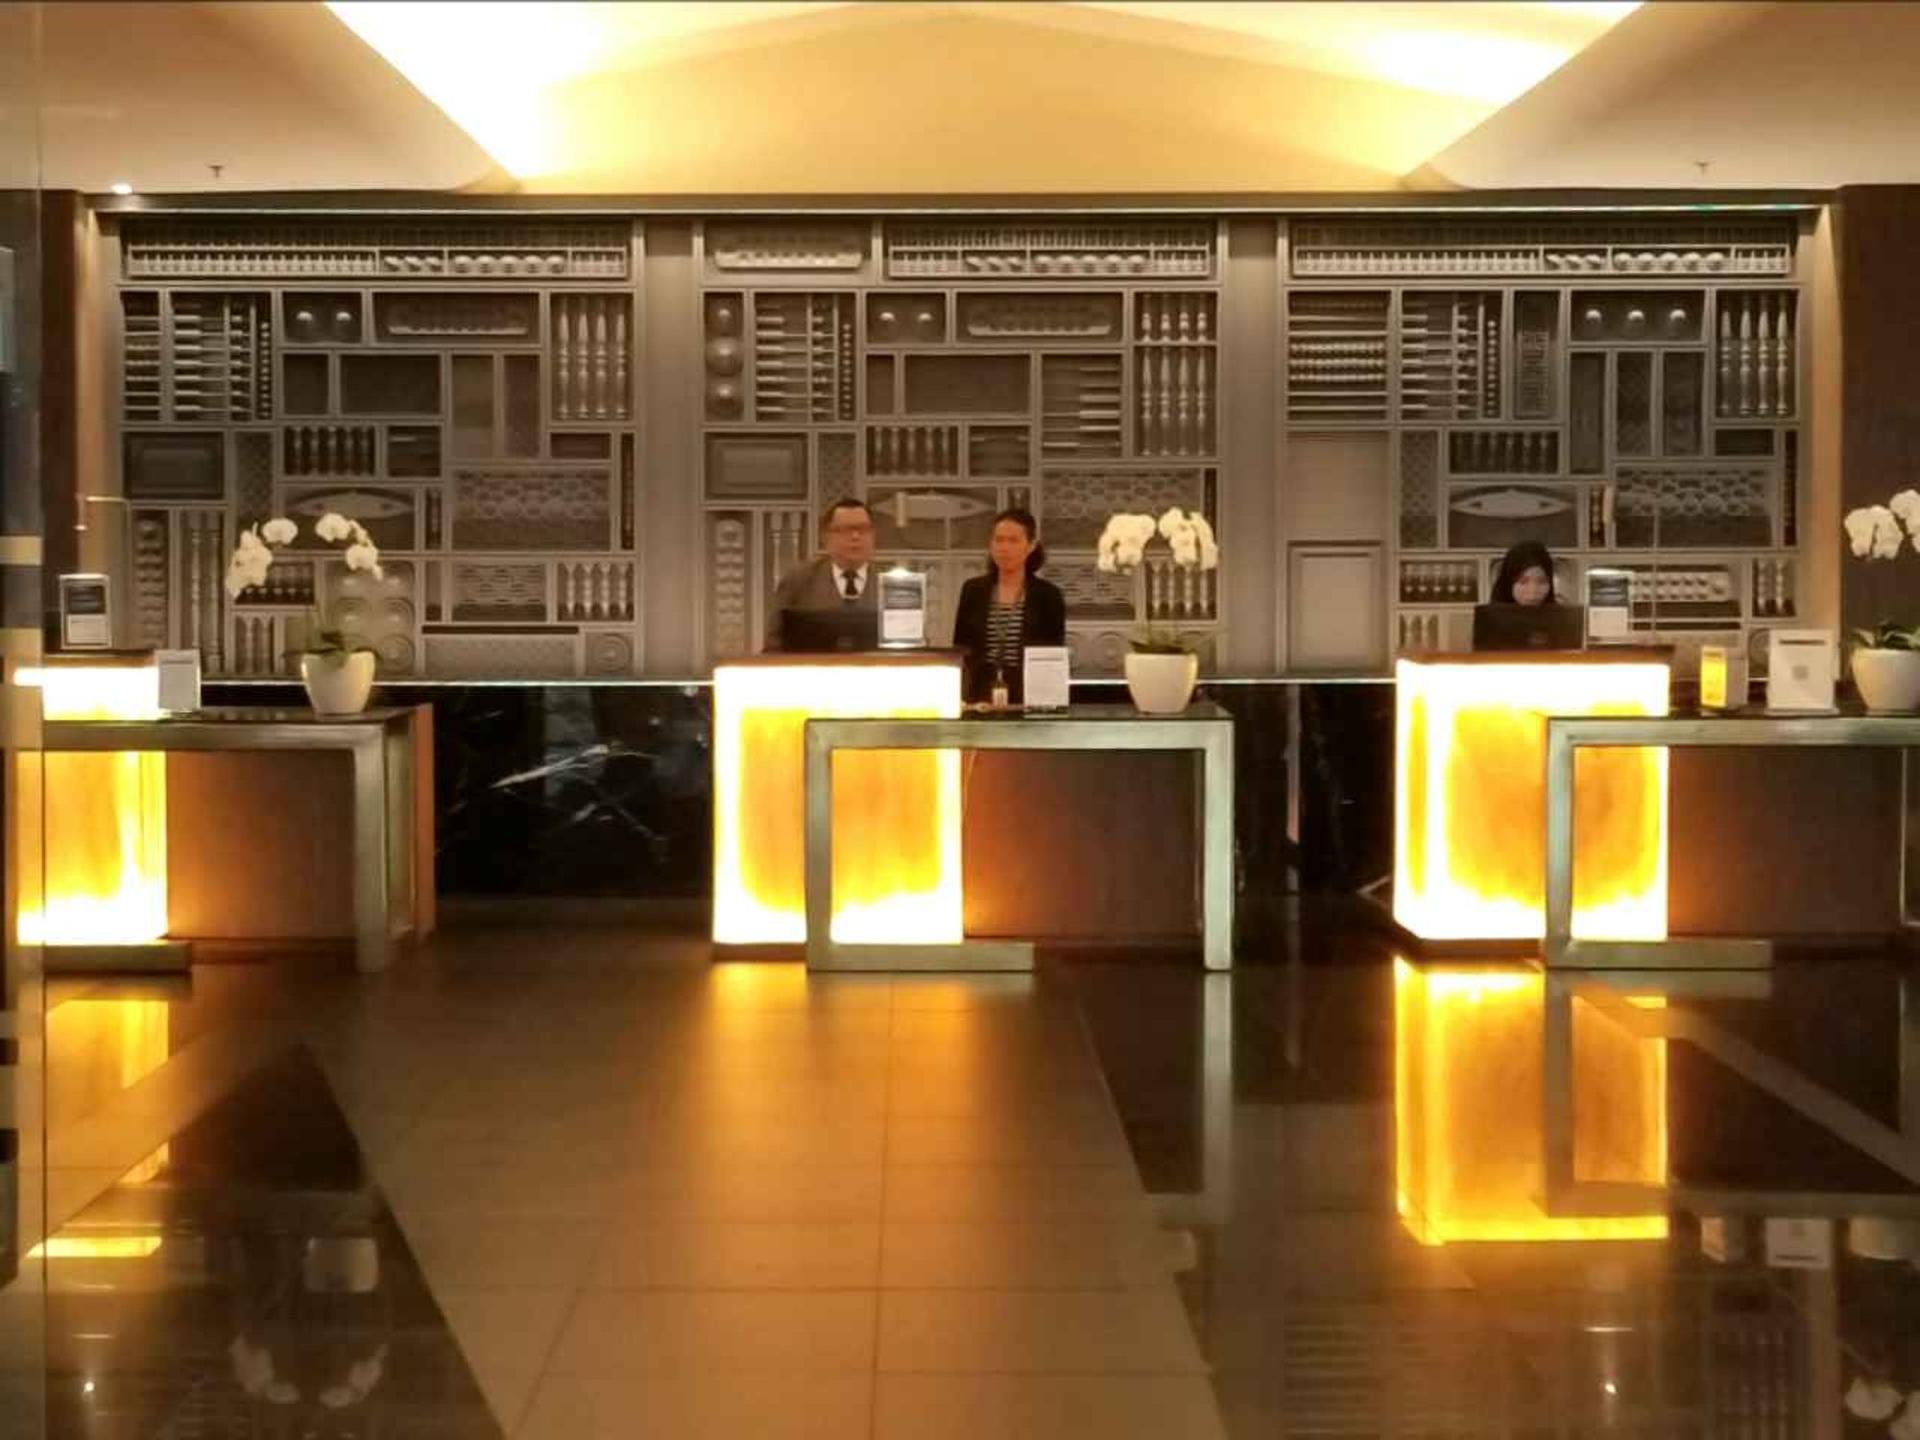 Malaysia Airlines Platinum Lounge image 11 of 26